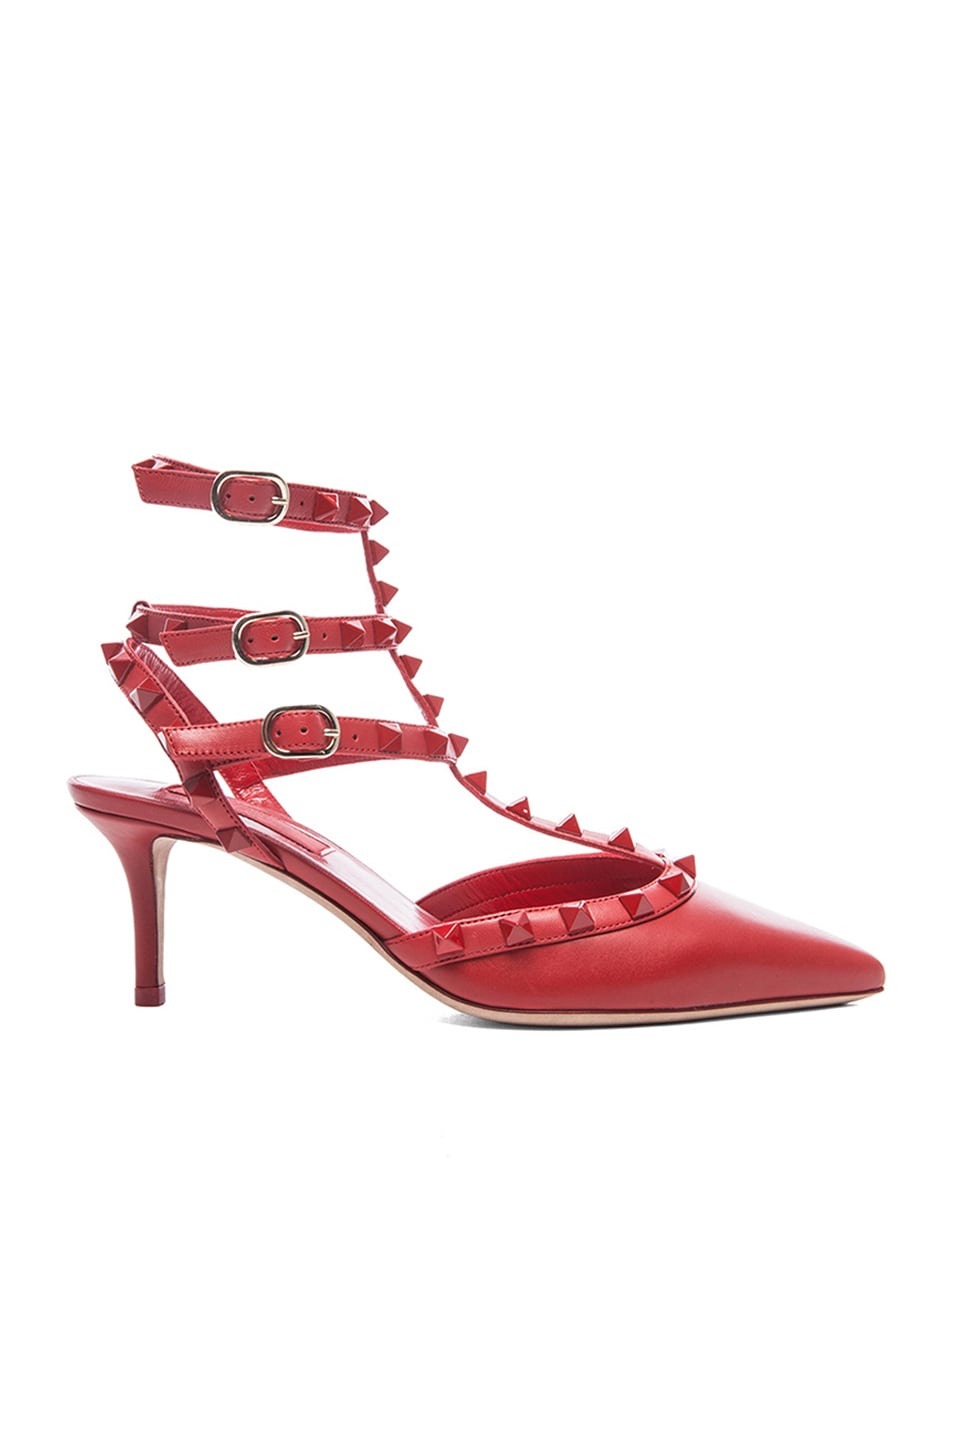 Valentino Rouge Rockstud Leather Slingbacks T.65 in Rosso Red | FWRD